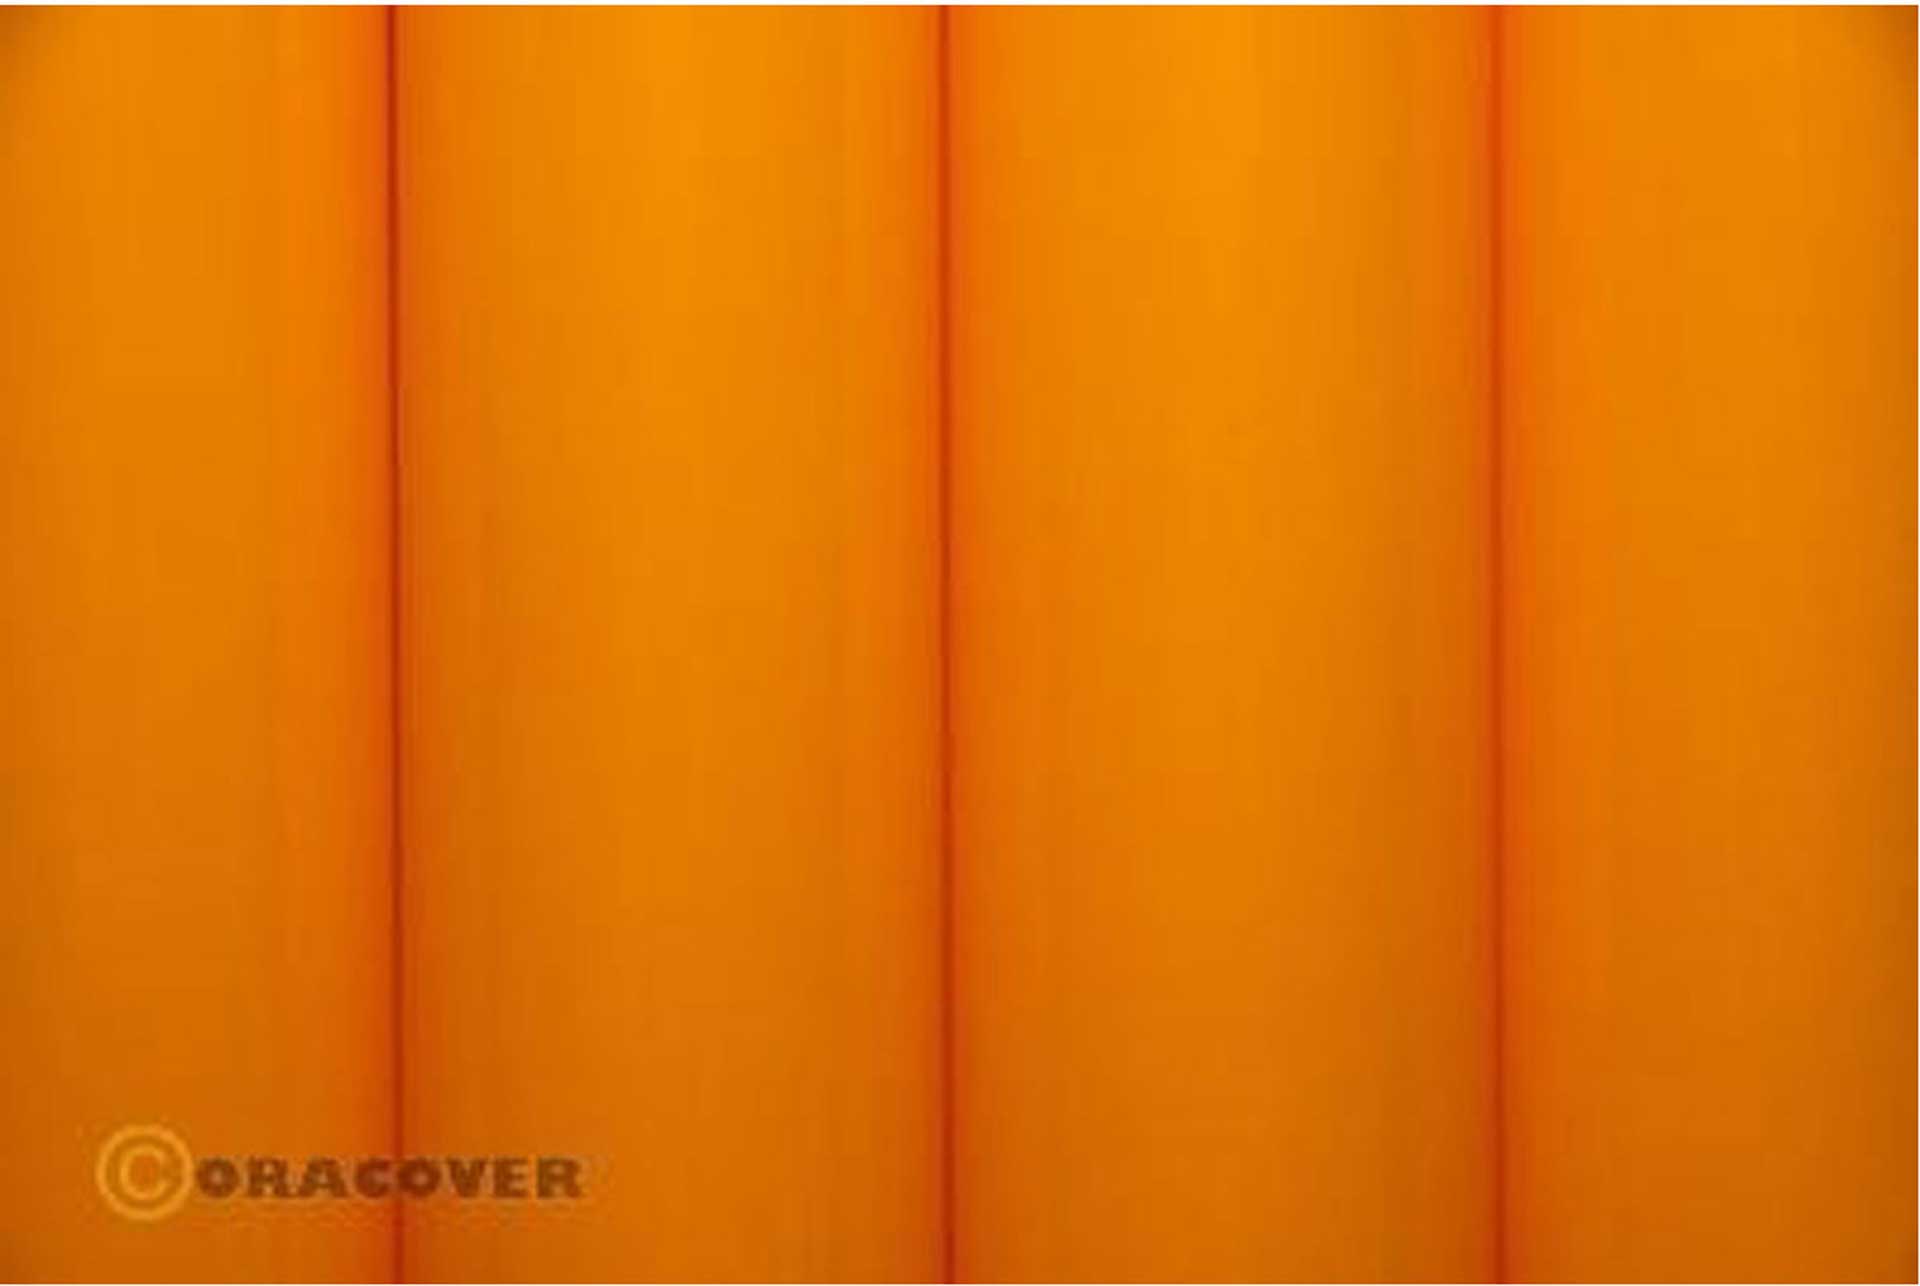 ORACOVER ADHESIVE FOIL GOLDEN YELLOW 10 METER # 32